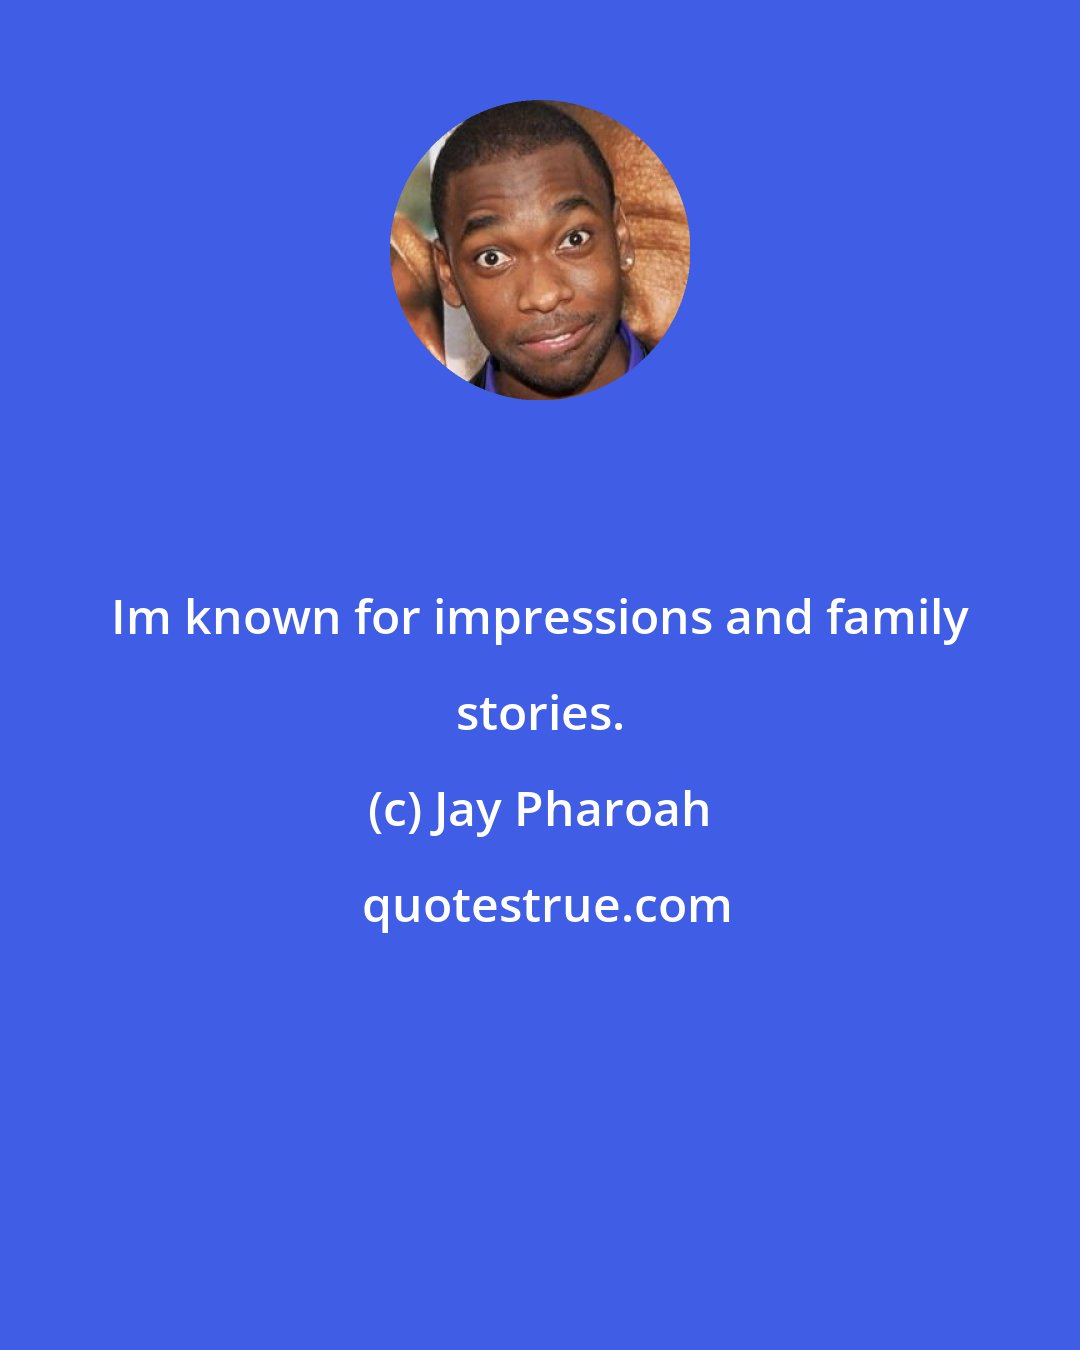 Jay Pharoah: Im known for impressions and family stories.